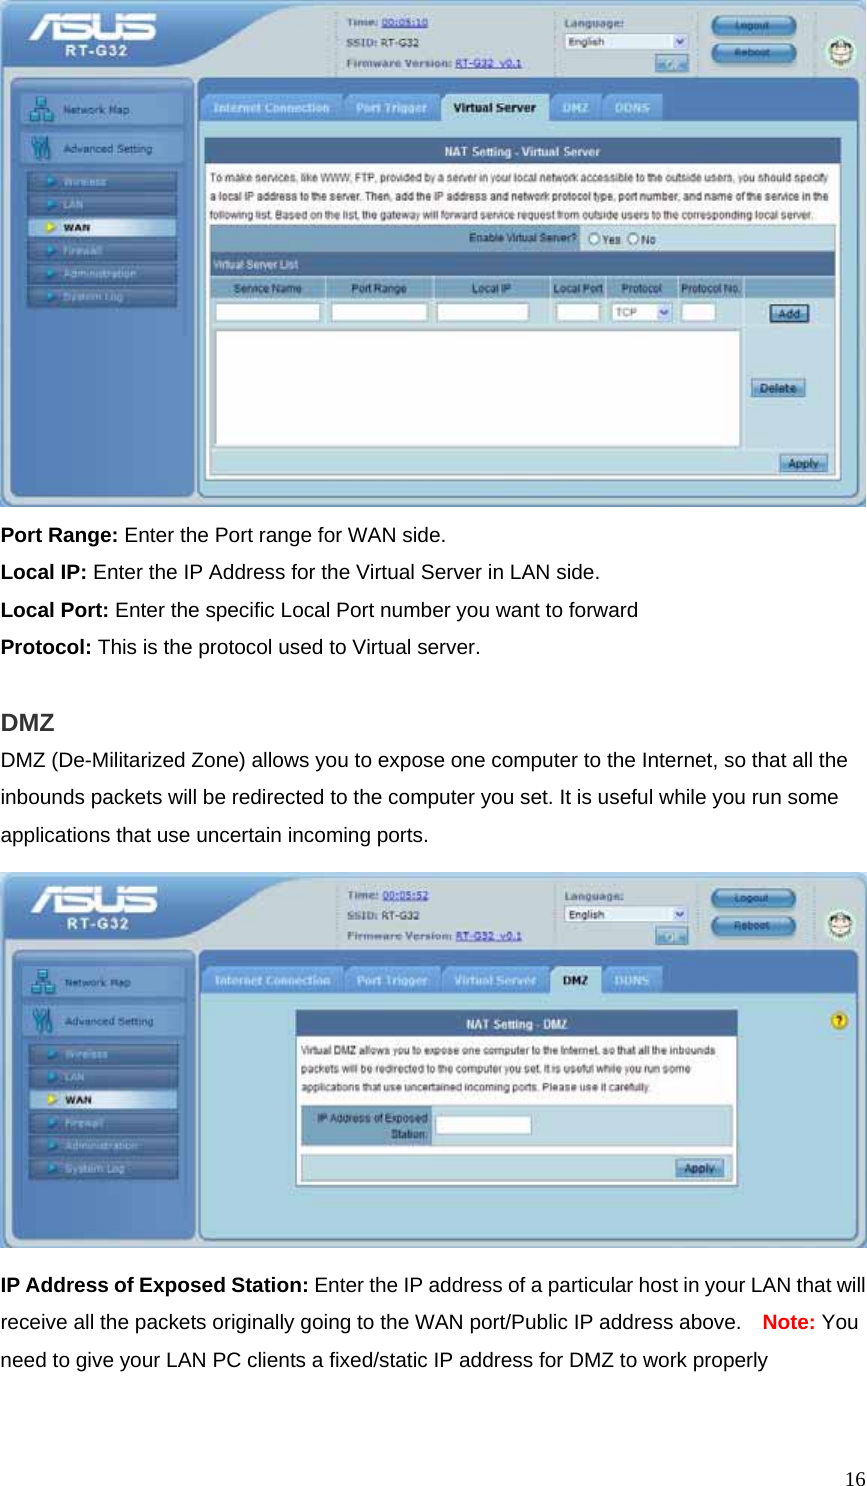  16 Port Range: Enter the Port range for WAN side. Local IP: Enter the IP Address for the Virtual Server in LAN side. Local Port: Enter the specific Local Port number you want to forward Protocol: This is the protocol used to Virtual server.  DMZ DMZ (De-Militarized Zone) allows you to expose one computer to the Internet, so that all the inbounds packets will be redirected to the computer you set. It is useful while you run some applications that use uncertain incoming ports.    IP Address of Exposed Station: Enter the IP address of a particular host in your LAN that will receive all the packets originally going to the WAN port/Public IP address above.    Note: You need to give your LAN PC clients a fixed/static IP address for DMZ to work properly  